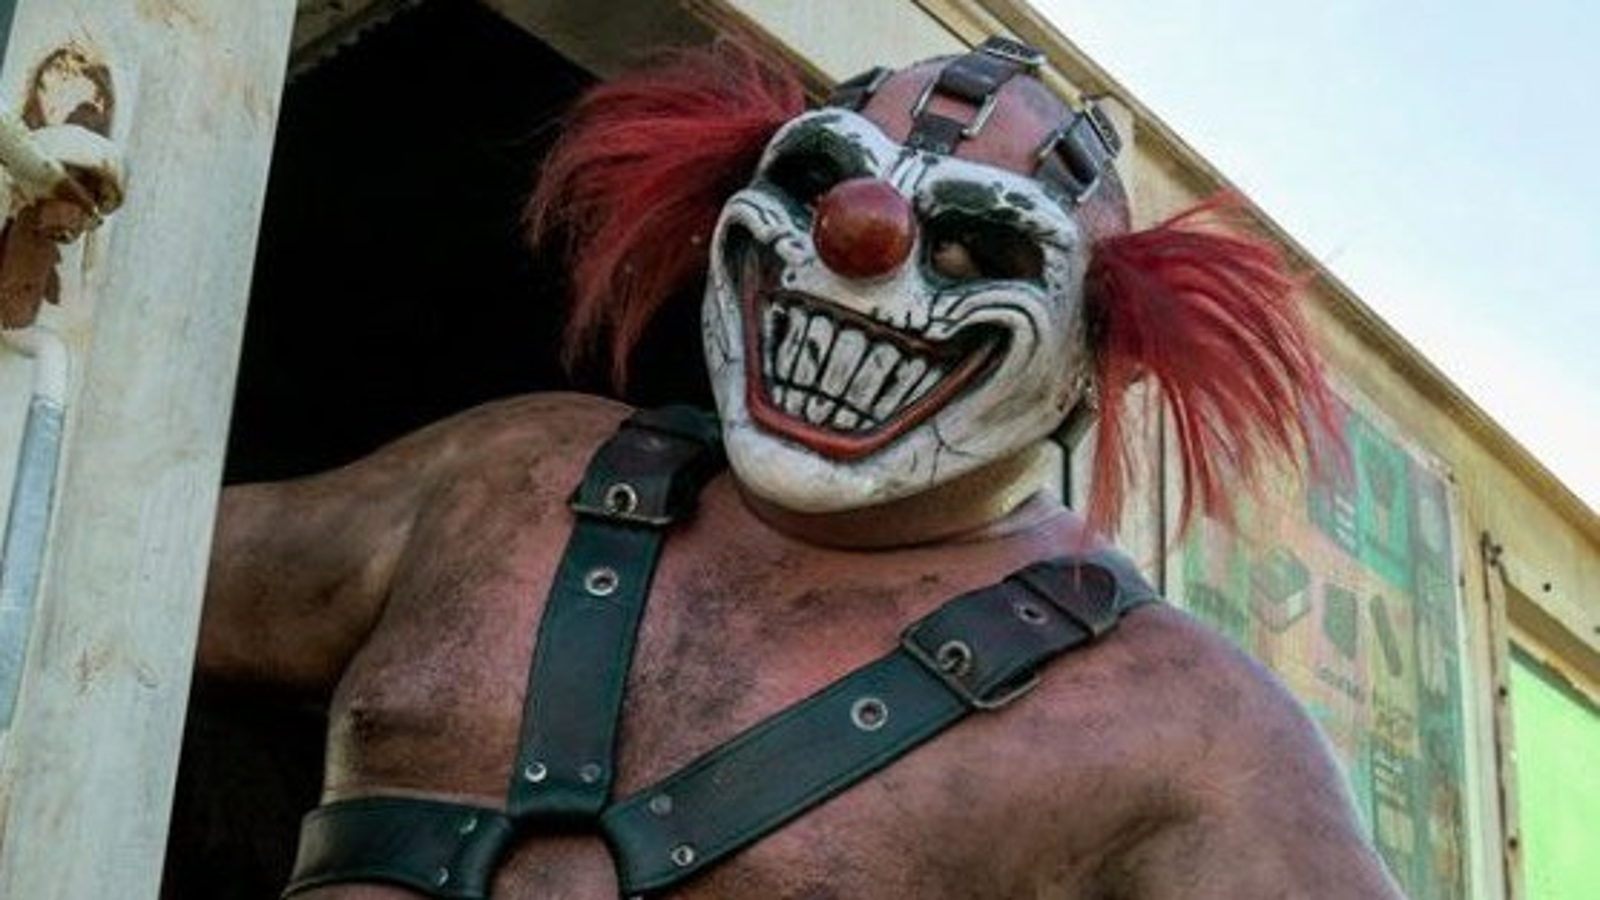 Twisted Metal Renewed for Season 2 — Watch Peacock's Announcement